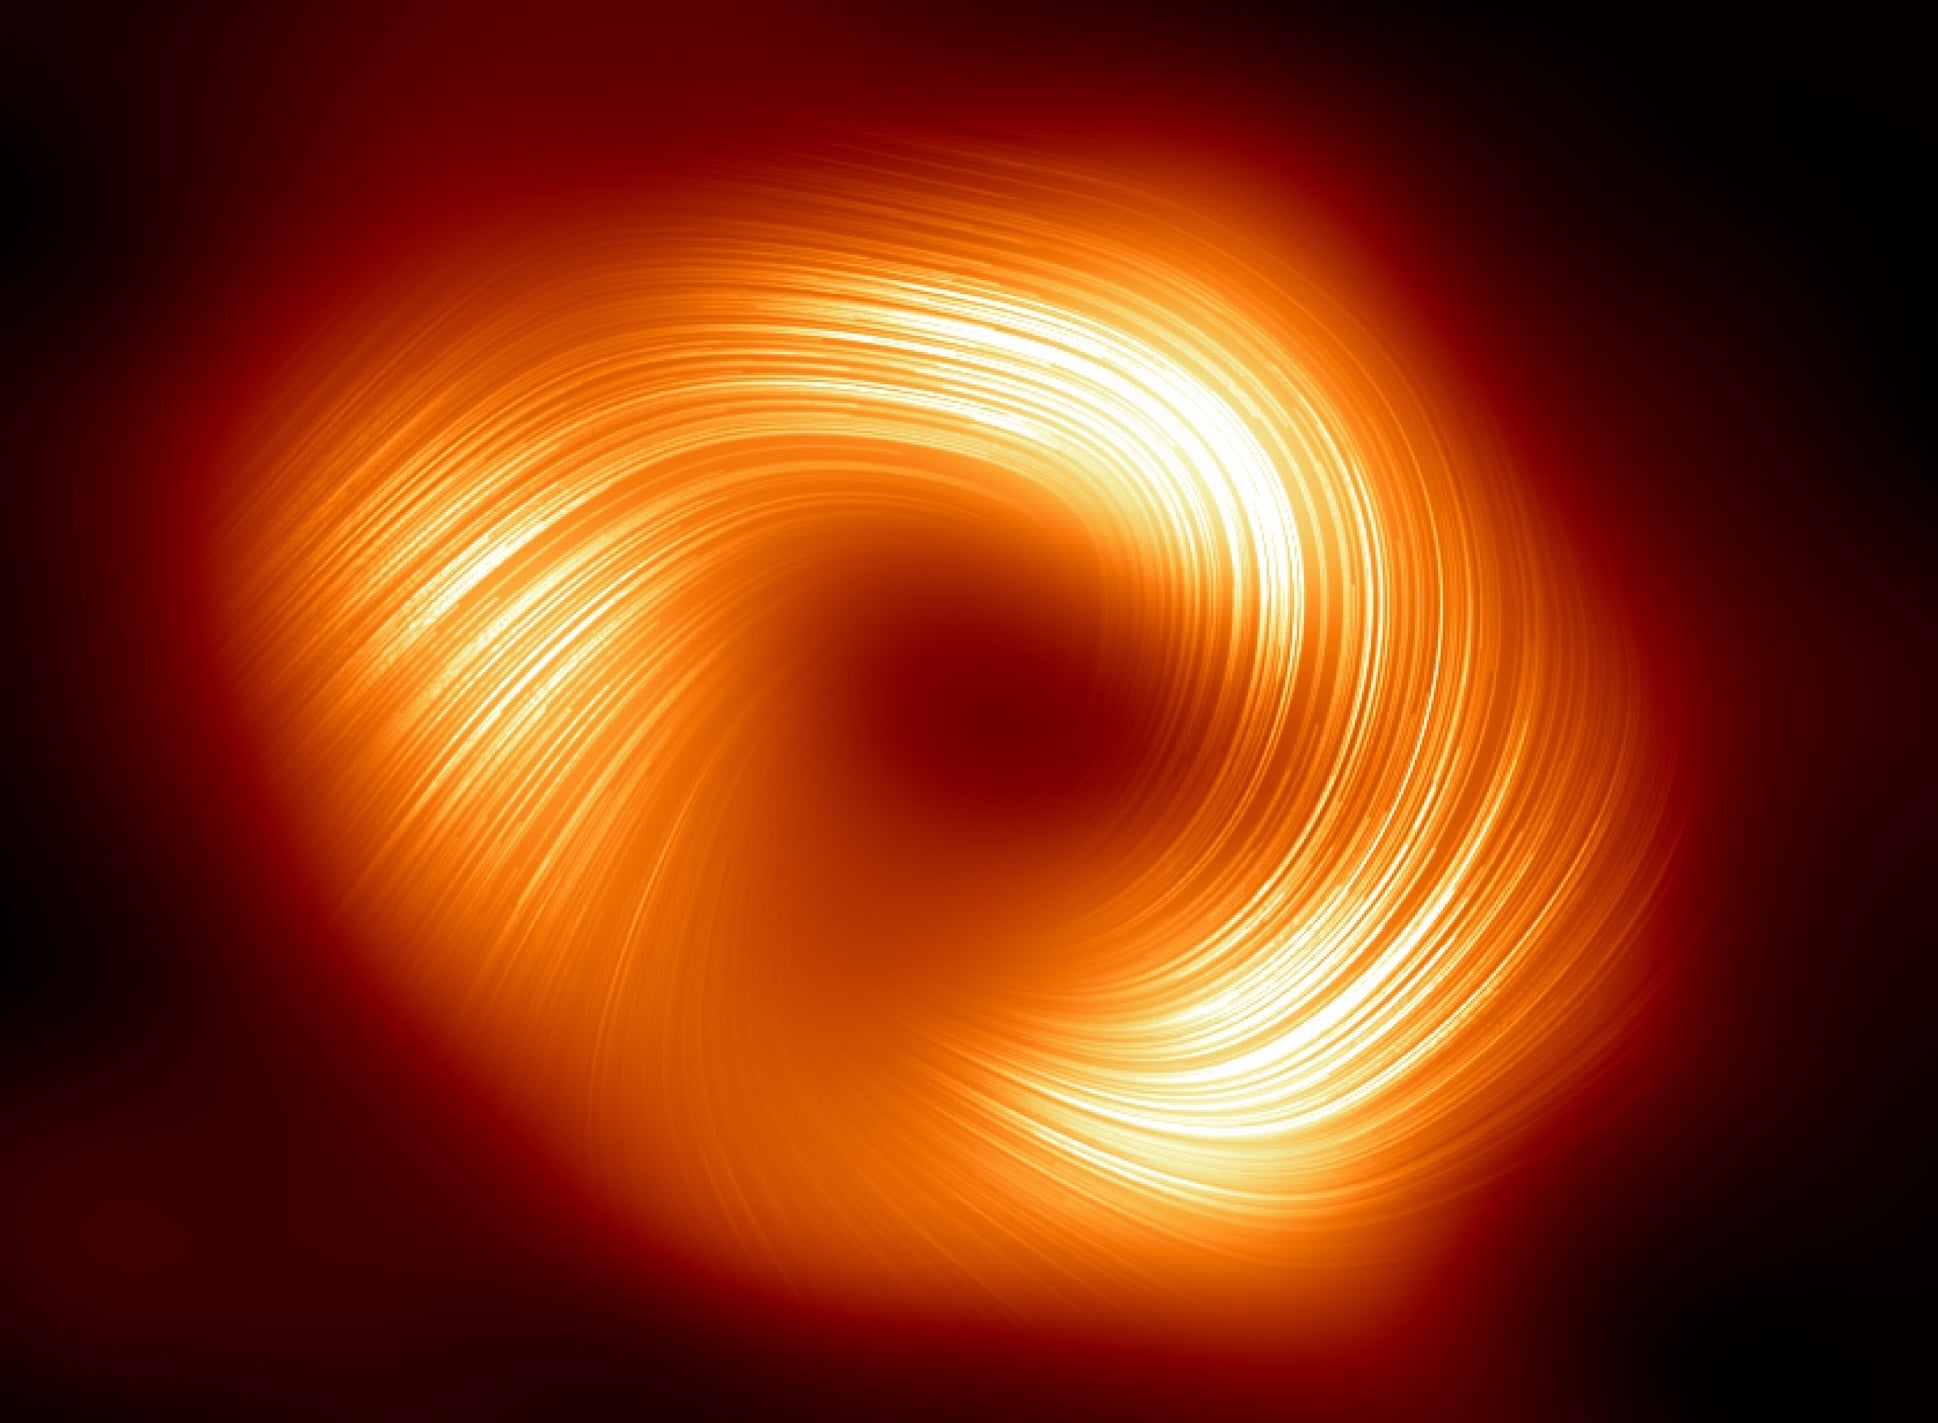 The object – known as Sagittarius A* – is shown in polarised light for the first time